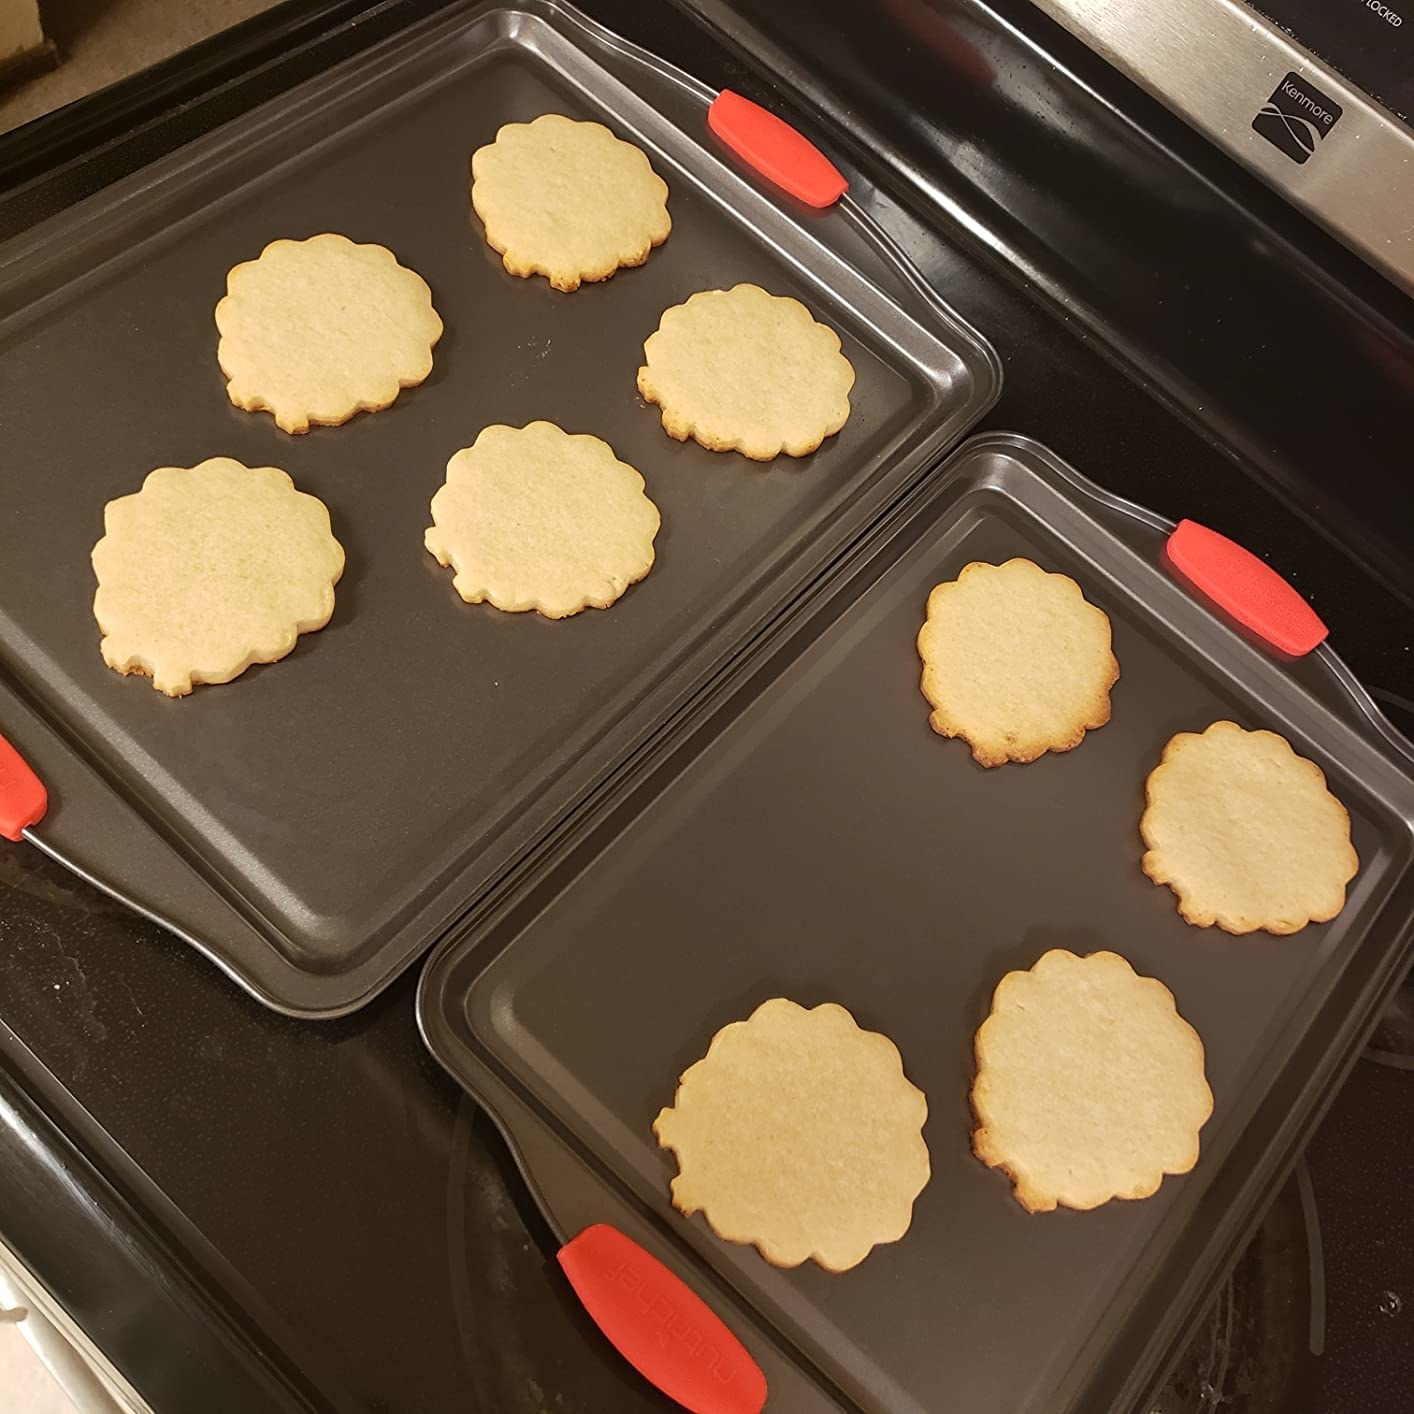 Reviewer image of baked cookies on the two baking sheets